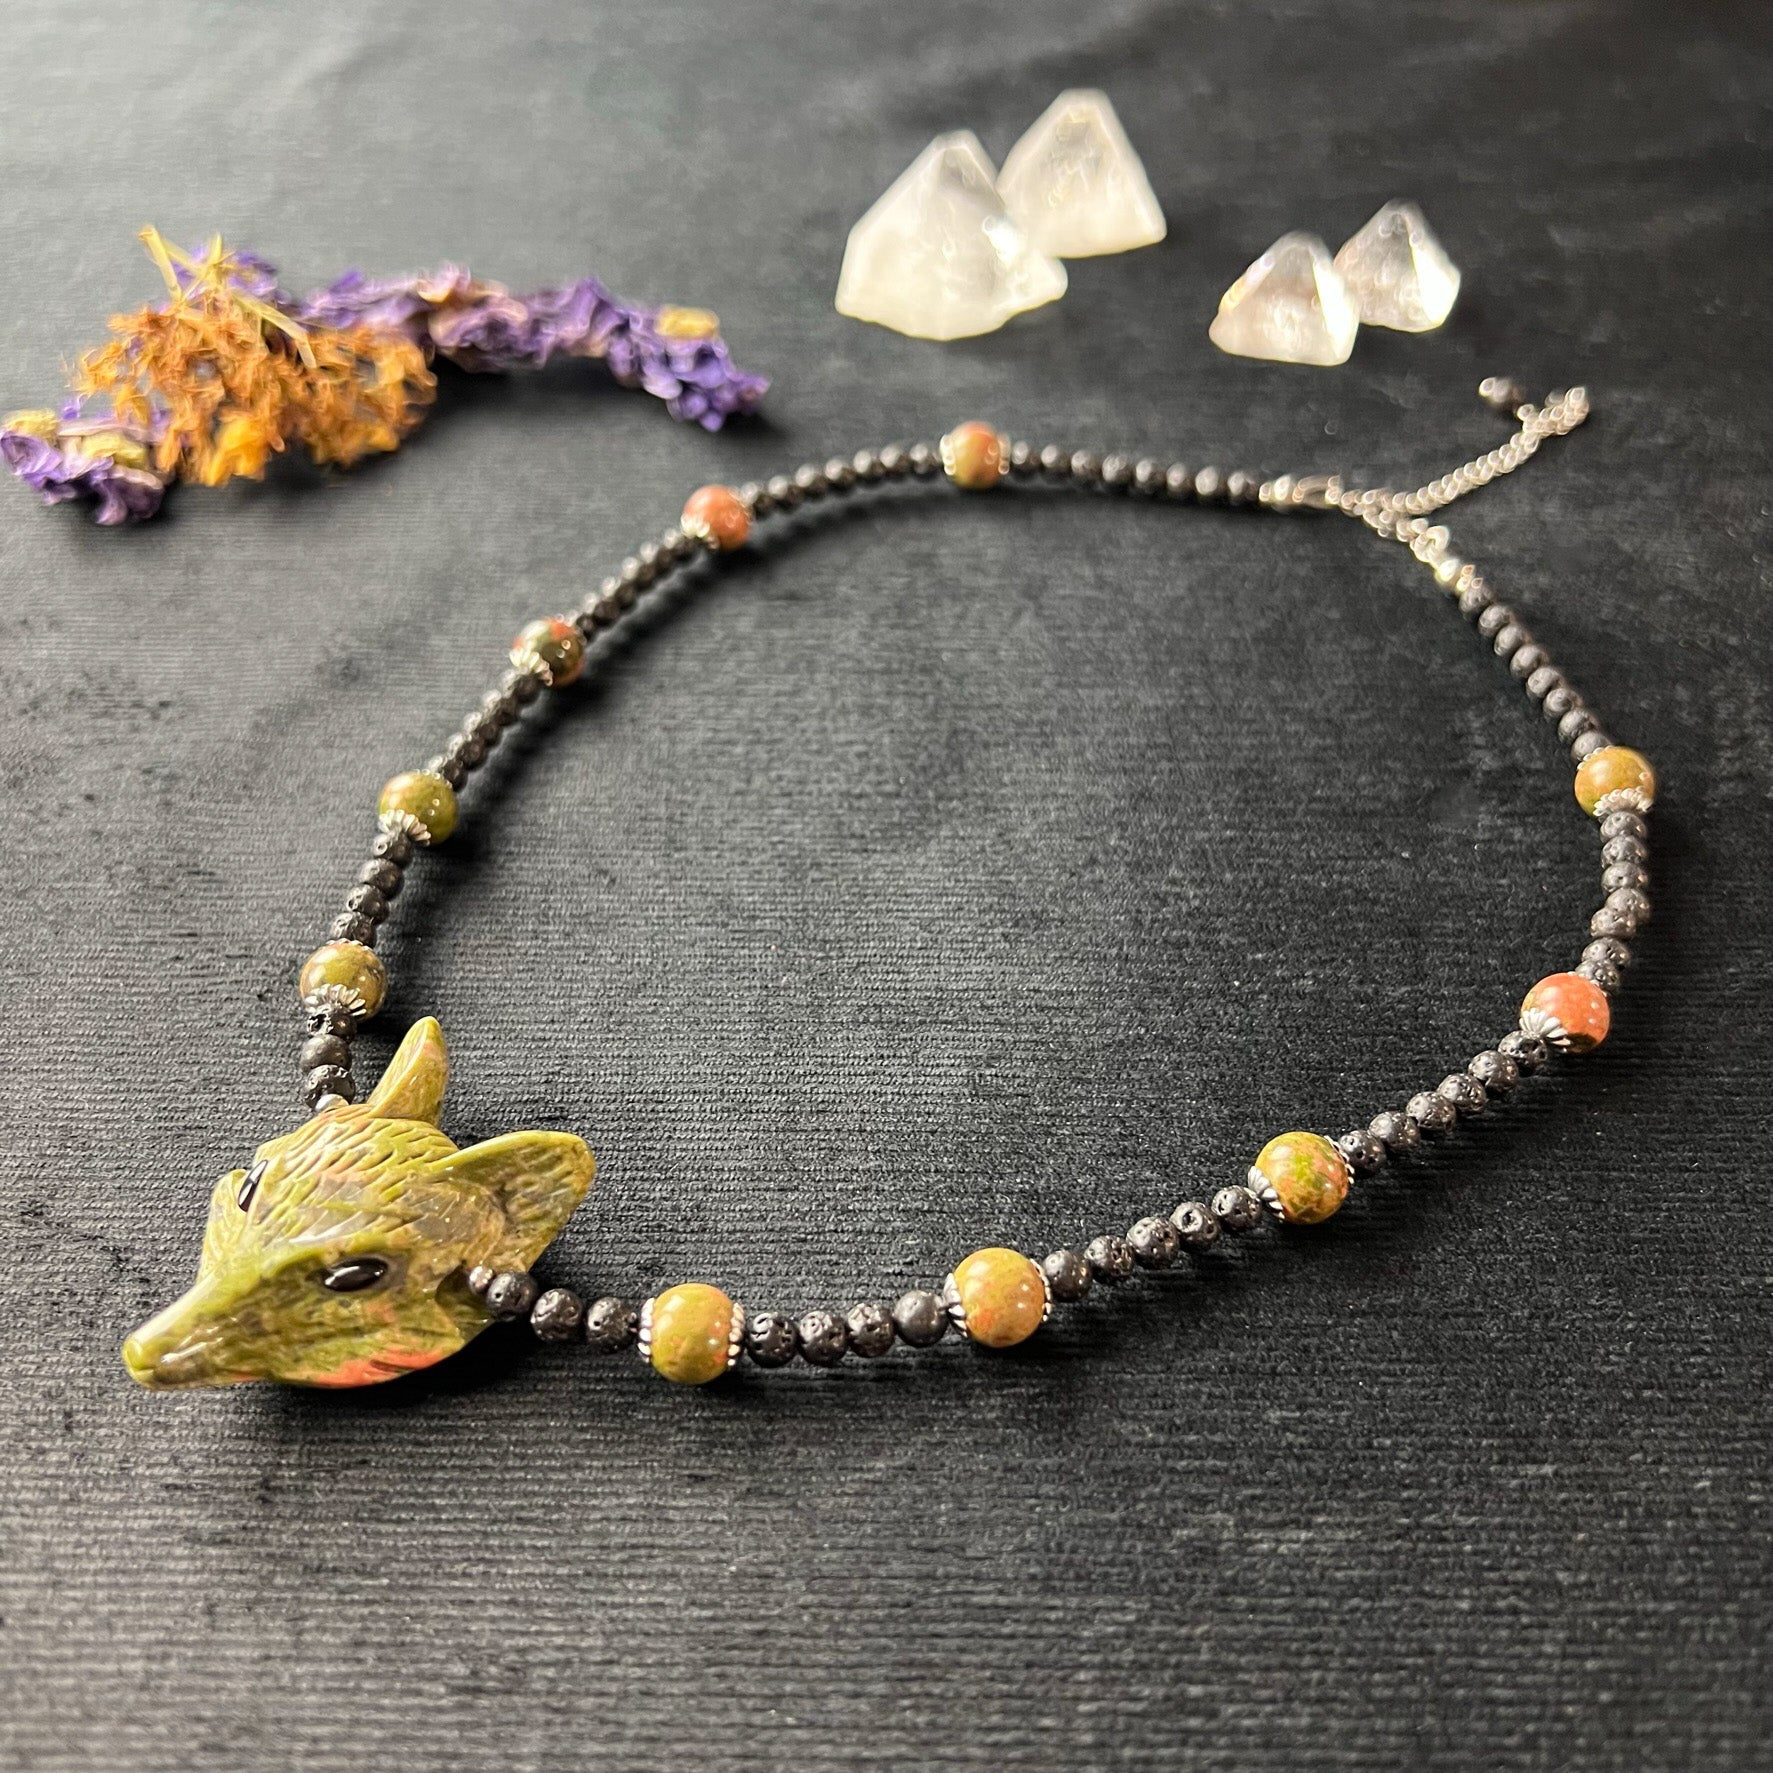 Carved fox necklace Unakite Lava rock and stainless steel ren fair beaded jewelry